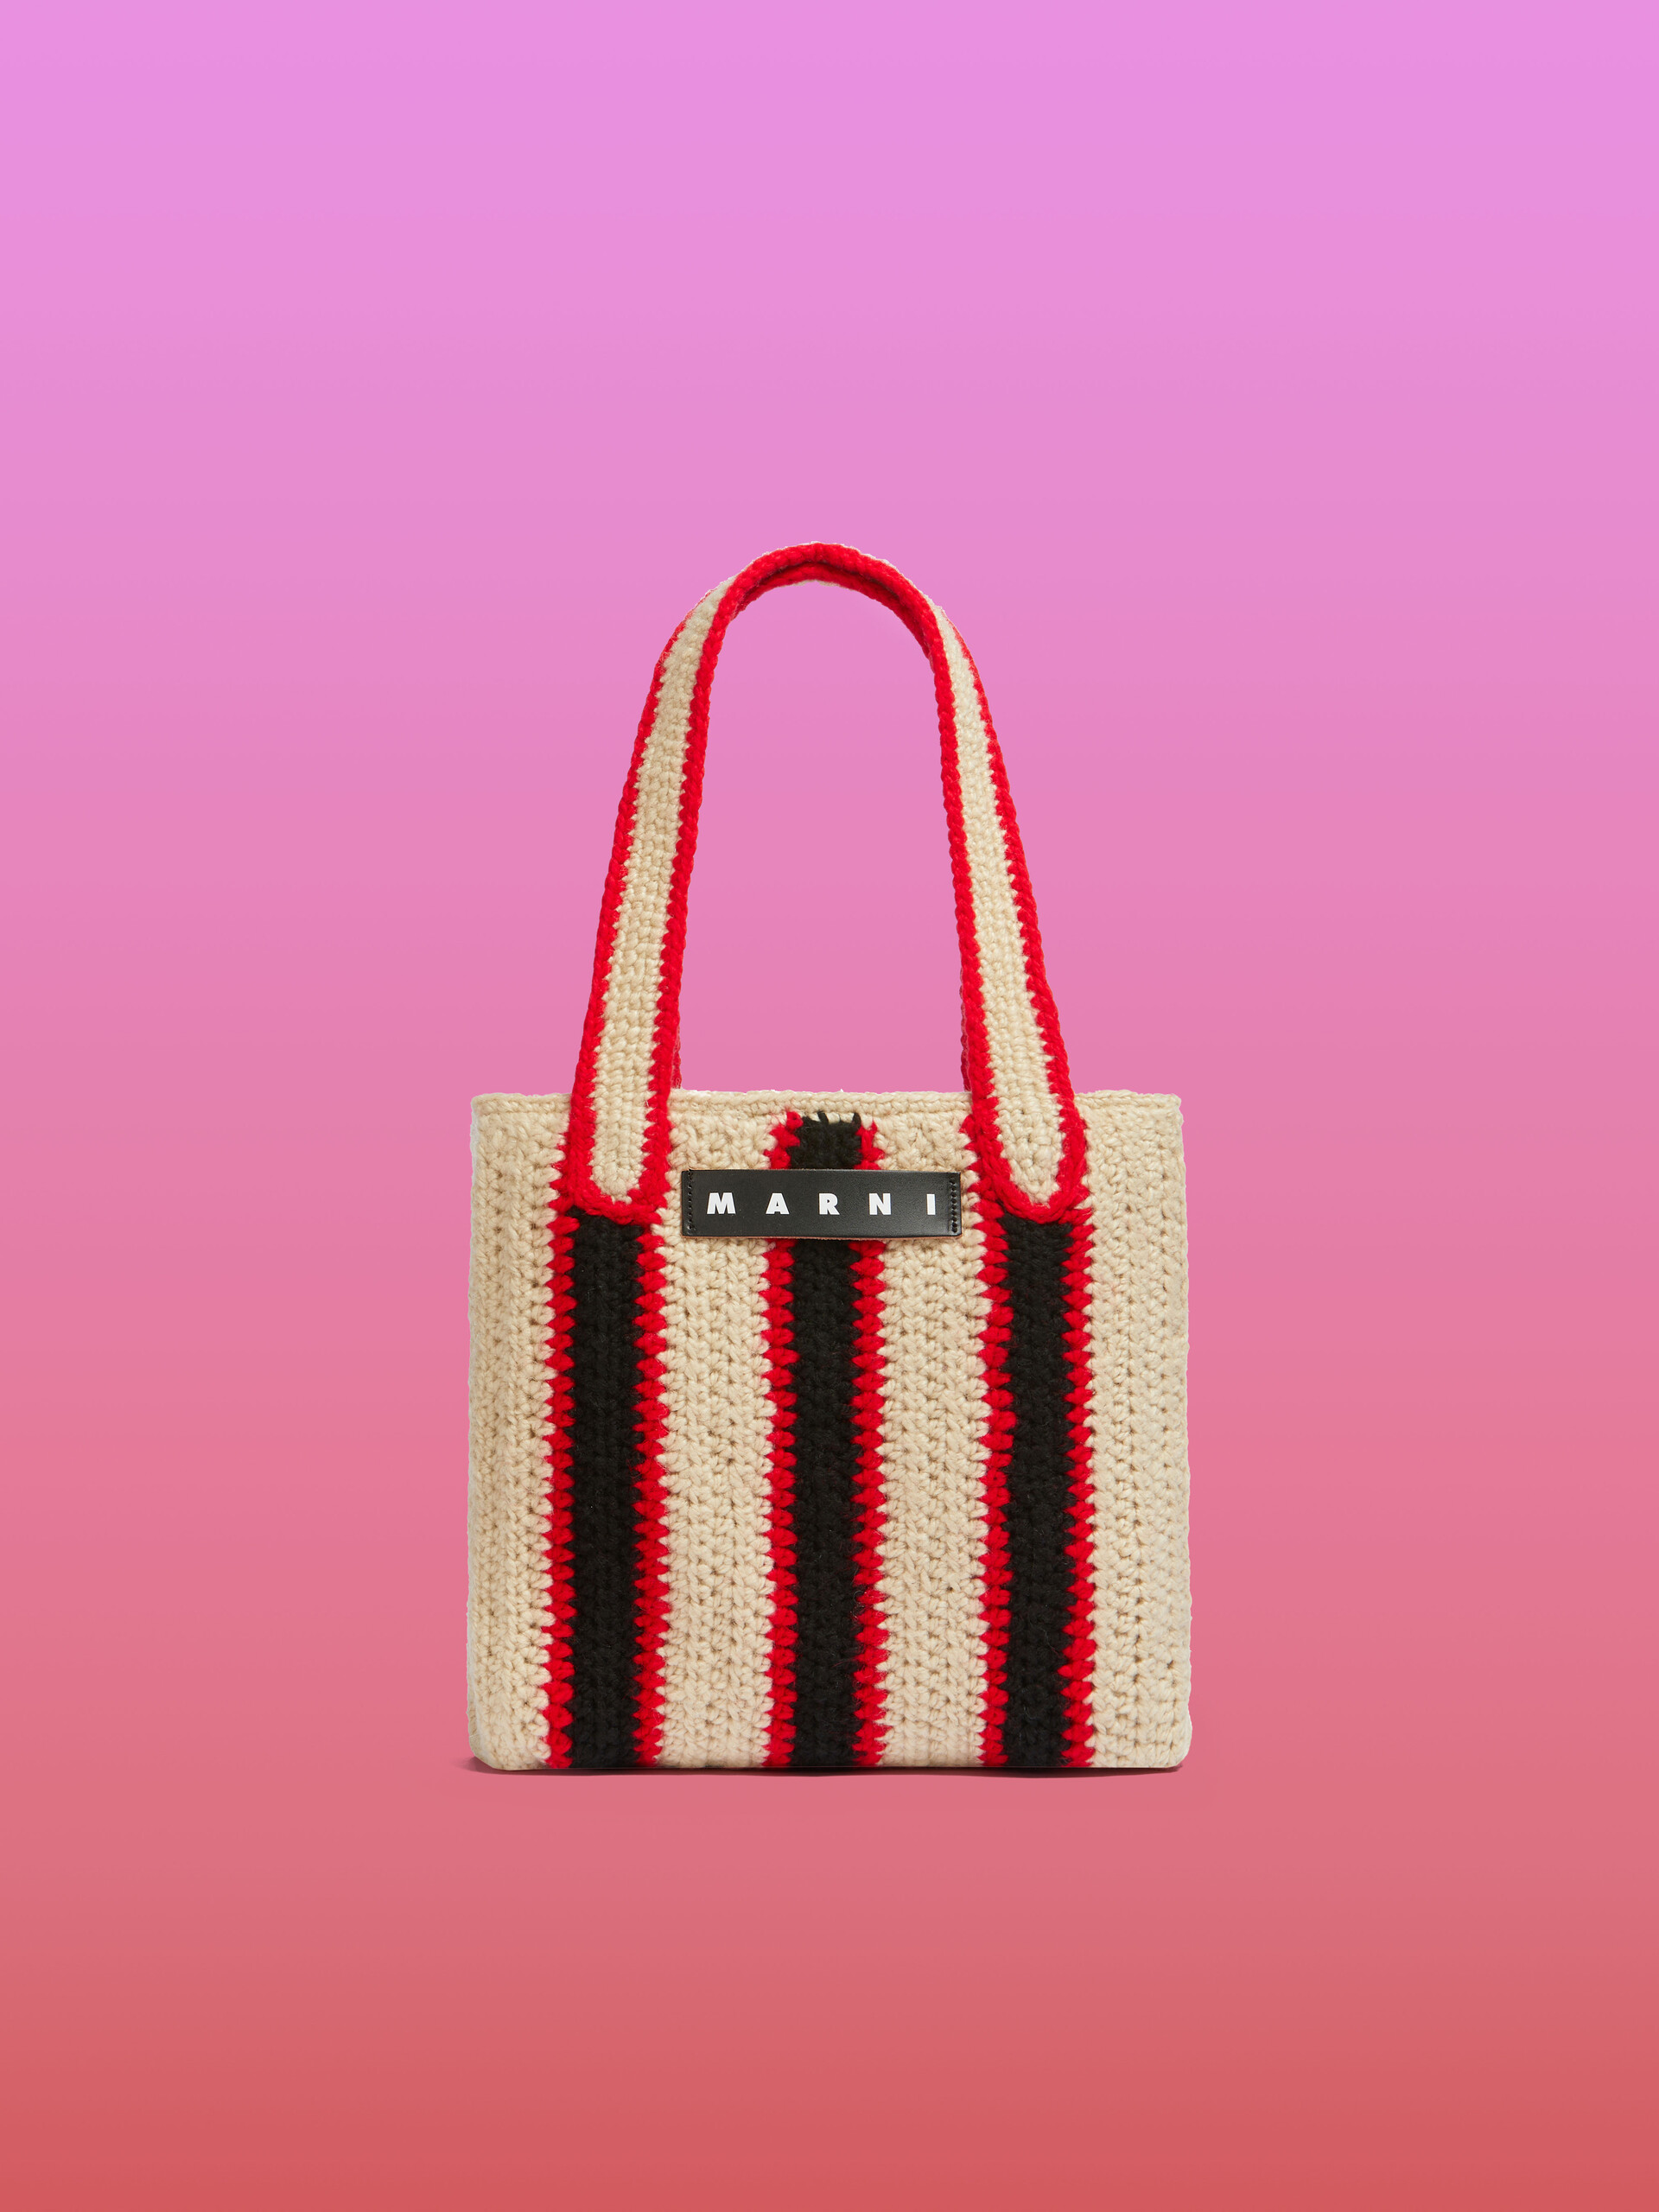 MARNI MARKET shopping bag in striped blue and red crochet - Shopping Bags - Image 1